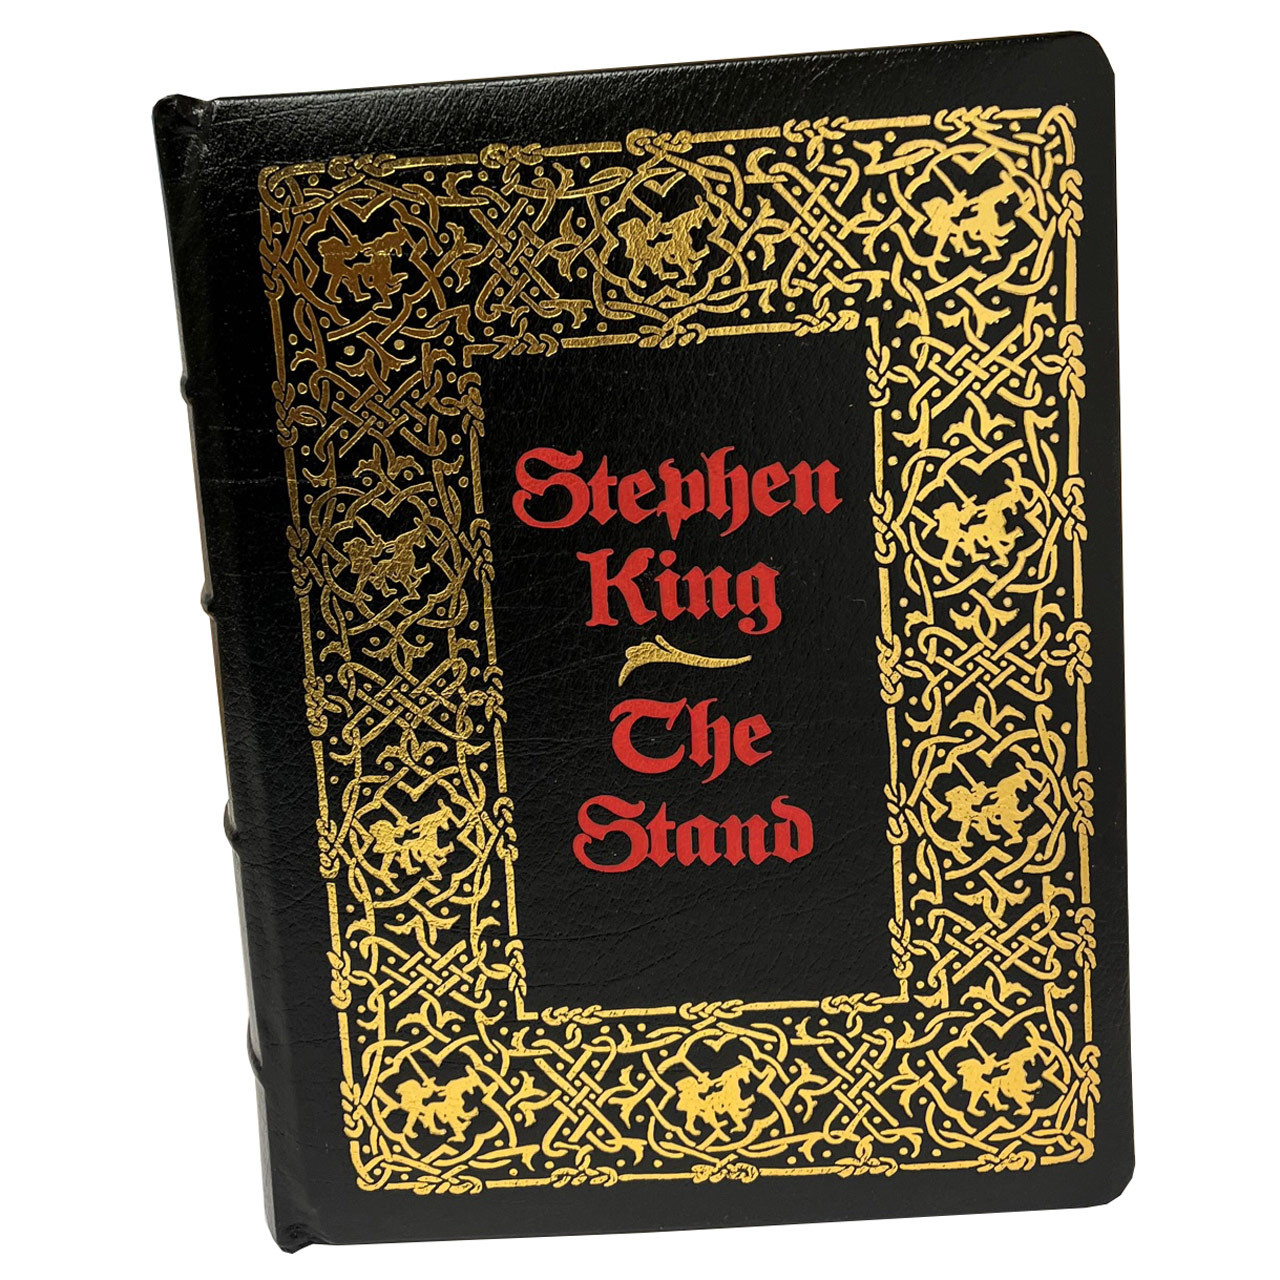 Stephen King "The Stand: The Complete and Uncut Edition" Signed Limited First Edition, Deluxe Leather Bound "Coffin" Bible No. 598 of 1,250 [New in Box]